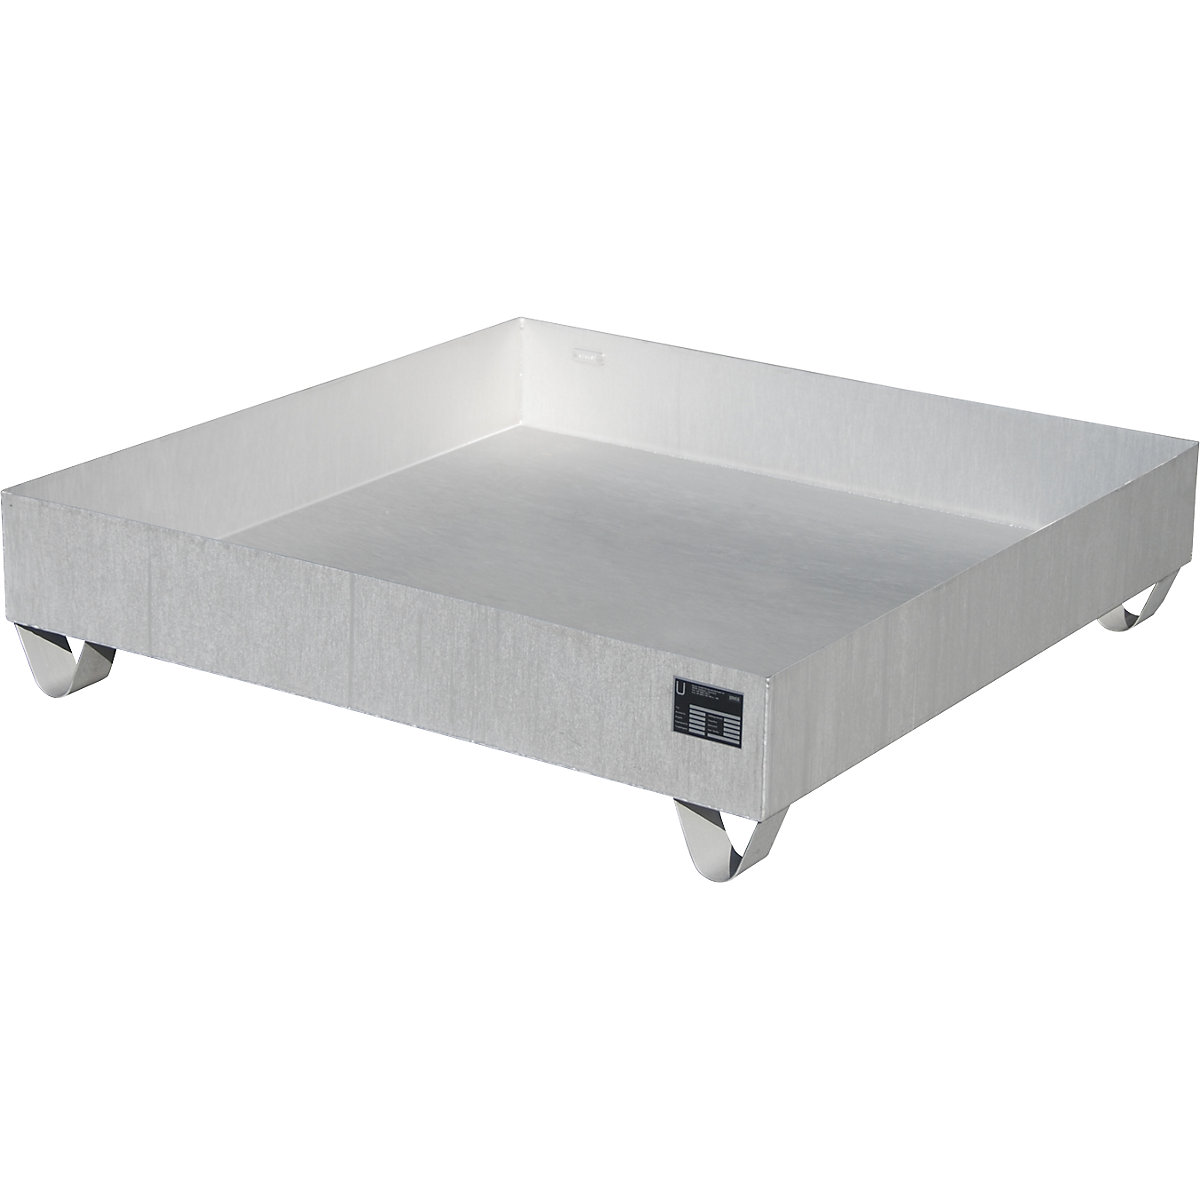 Stainless steel sump tray – eurokraft pro, for 200 l drums, 4 drums, LxWxH 1200 x 1200 x 285 mm-3